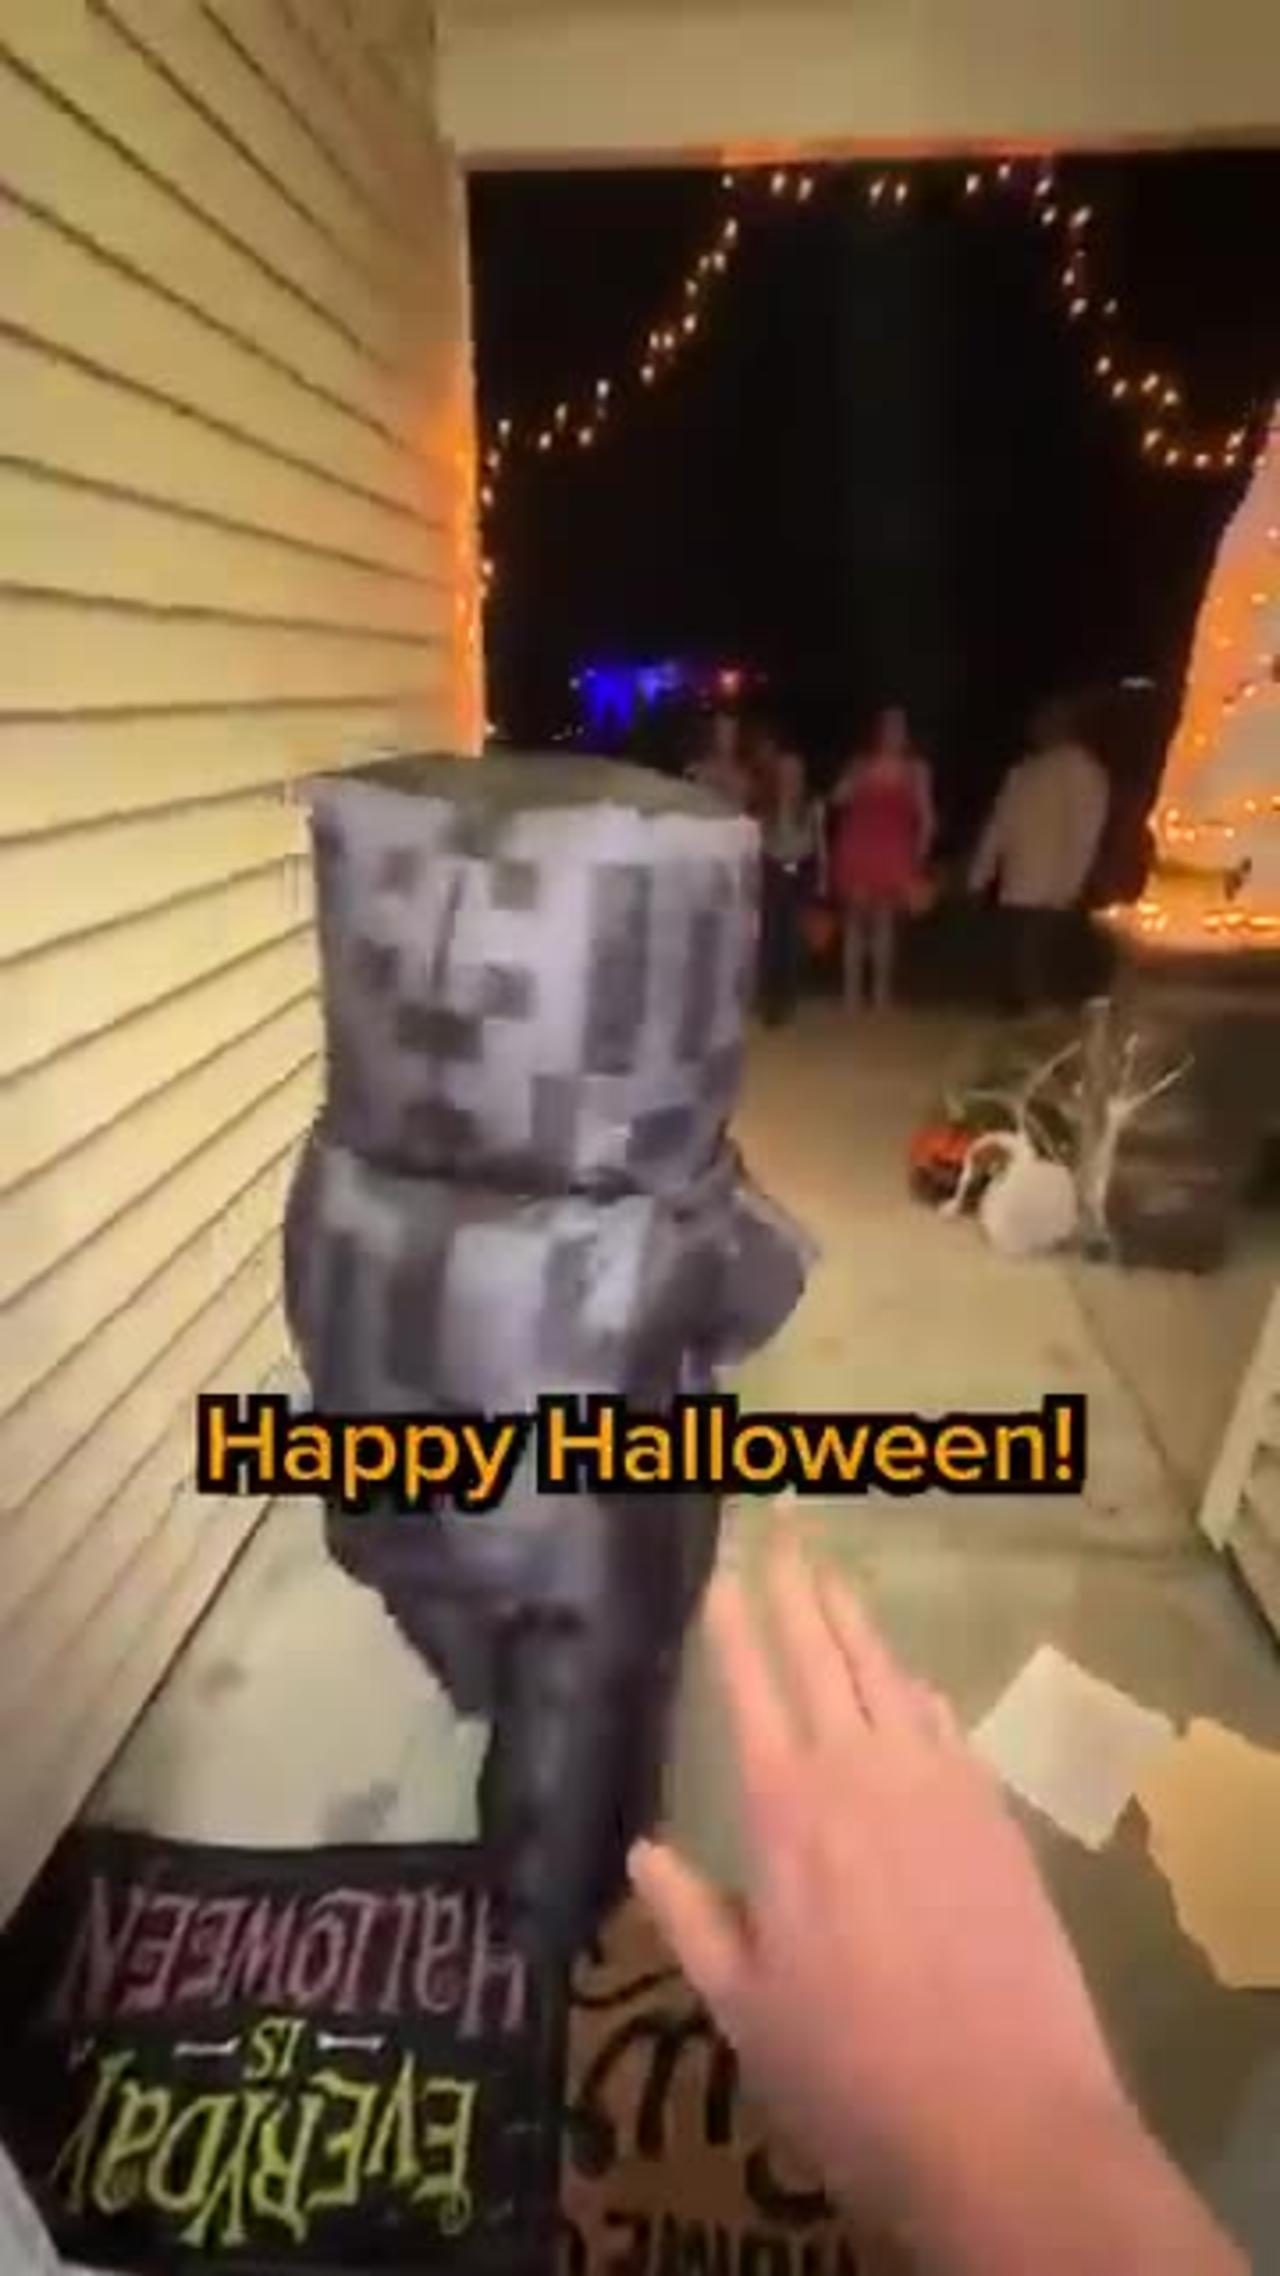 Giving iphones instead of candy on Halloween